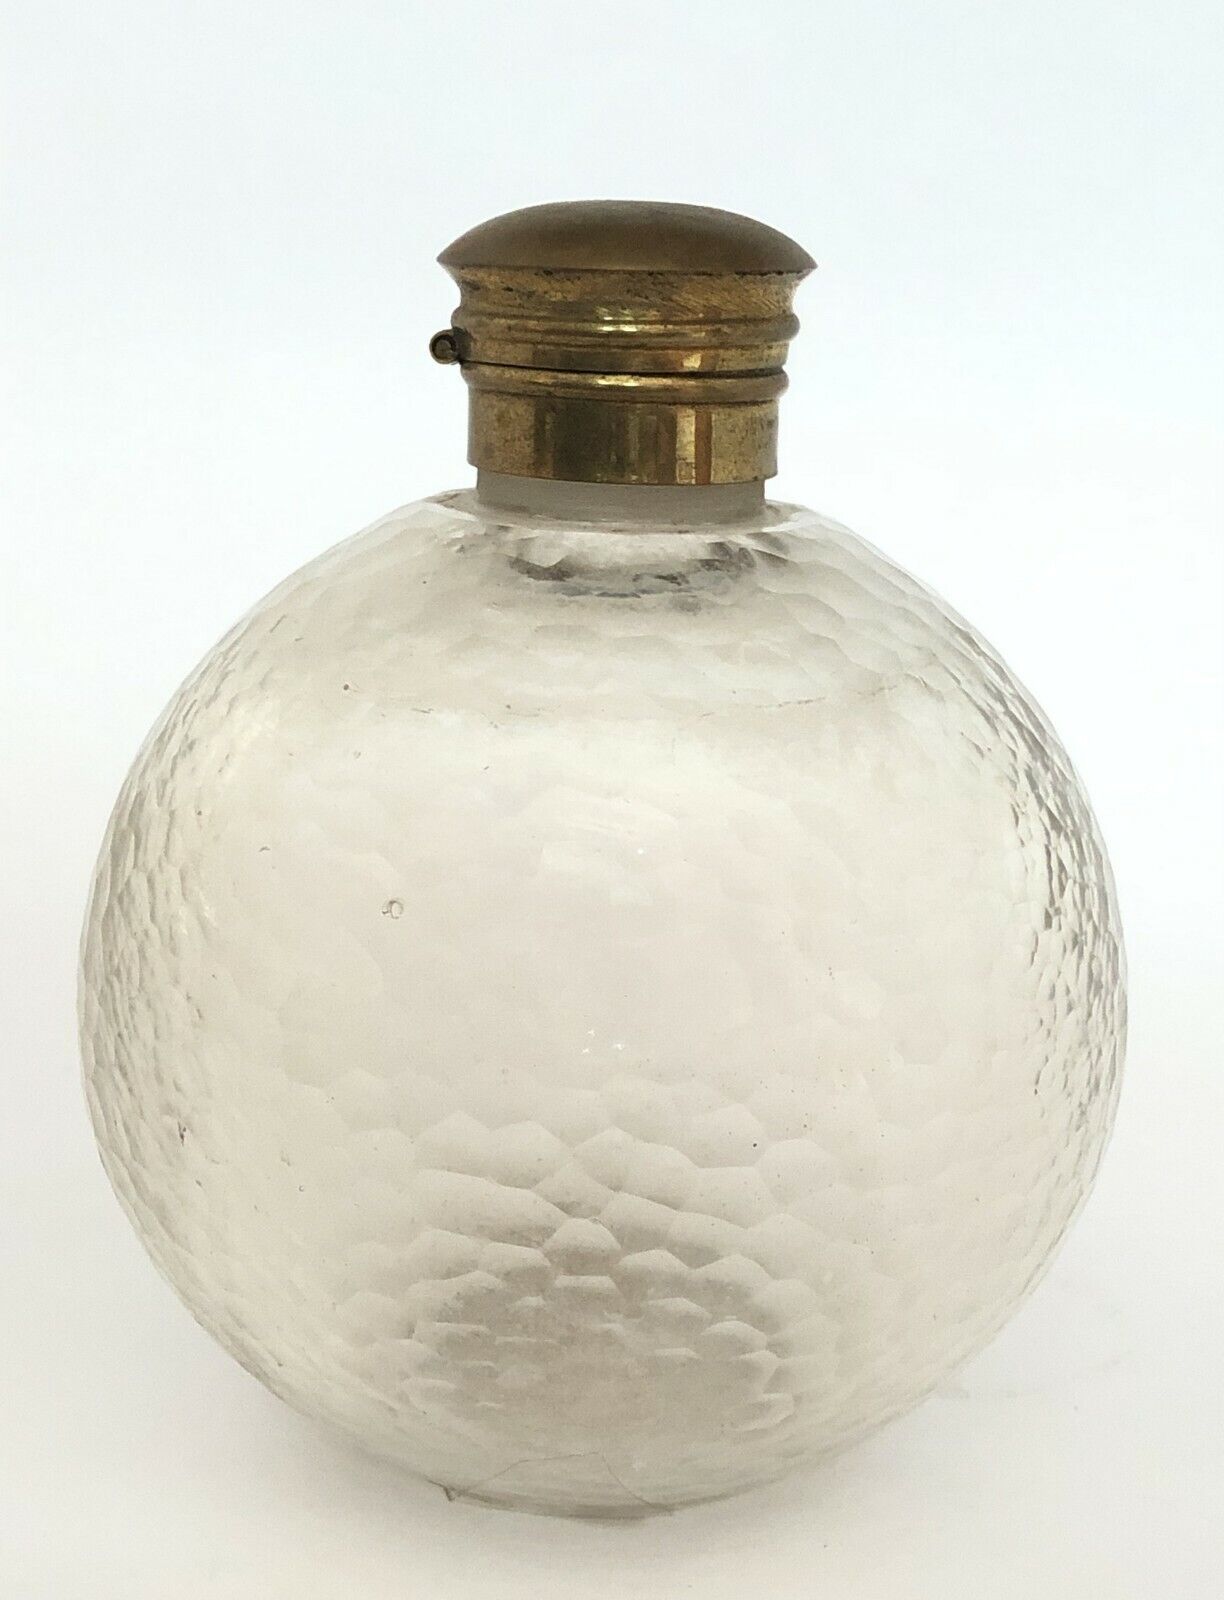 Vintage Perfume Bottle With Brass Cap Heavy Glass Collectible Decor. G14-113 